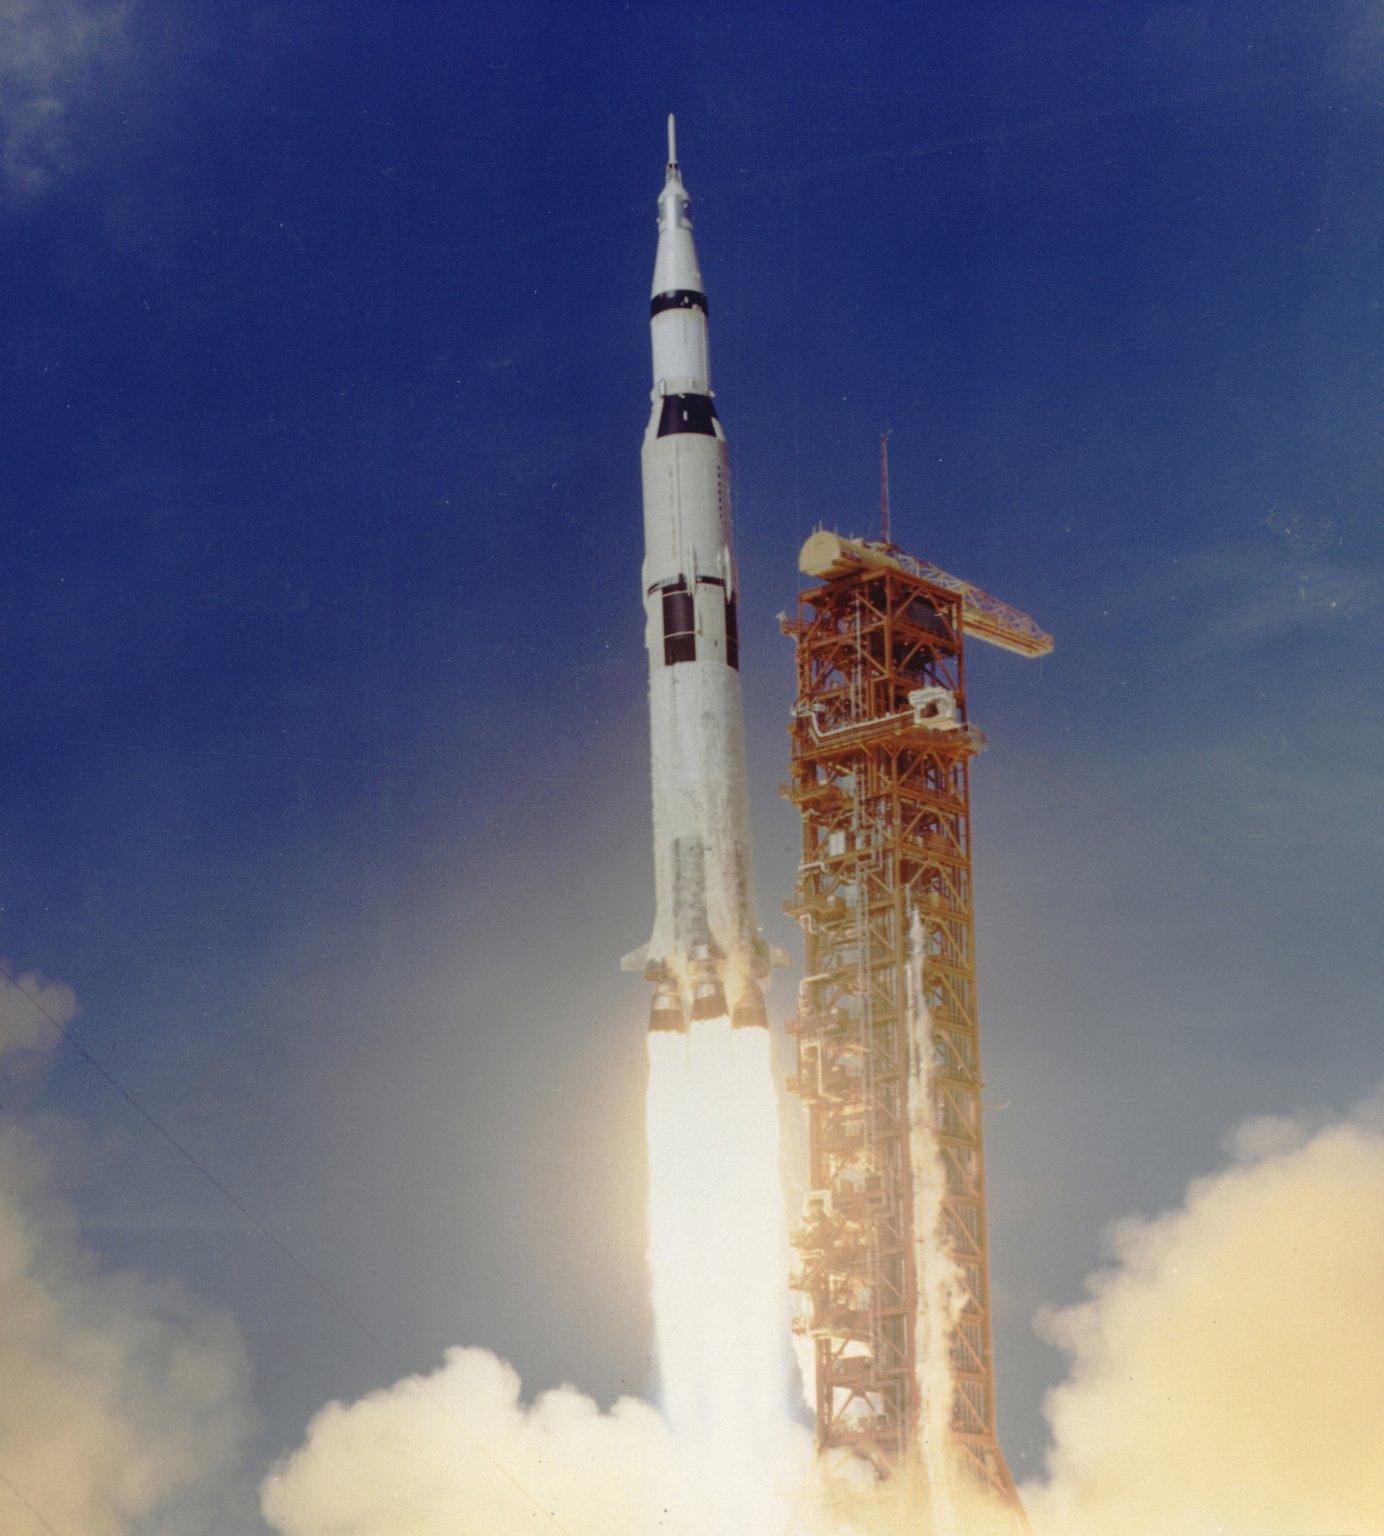 Apollo 11 Launched Via Saturn V Rocket. 24 July, 1969 at Kennedy Space Centre